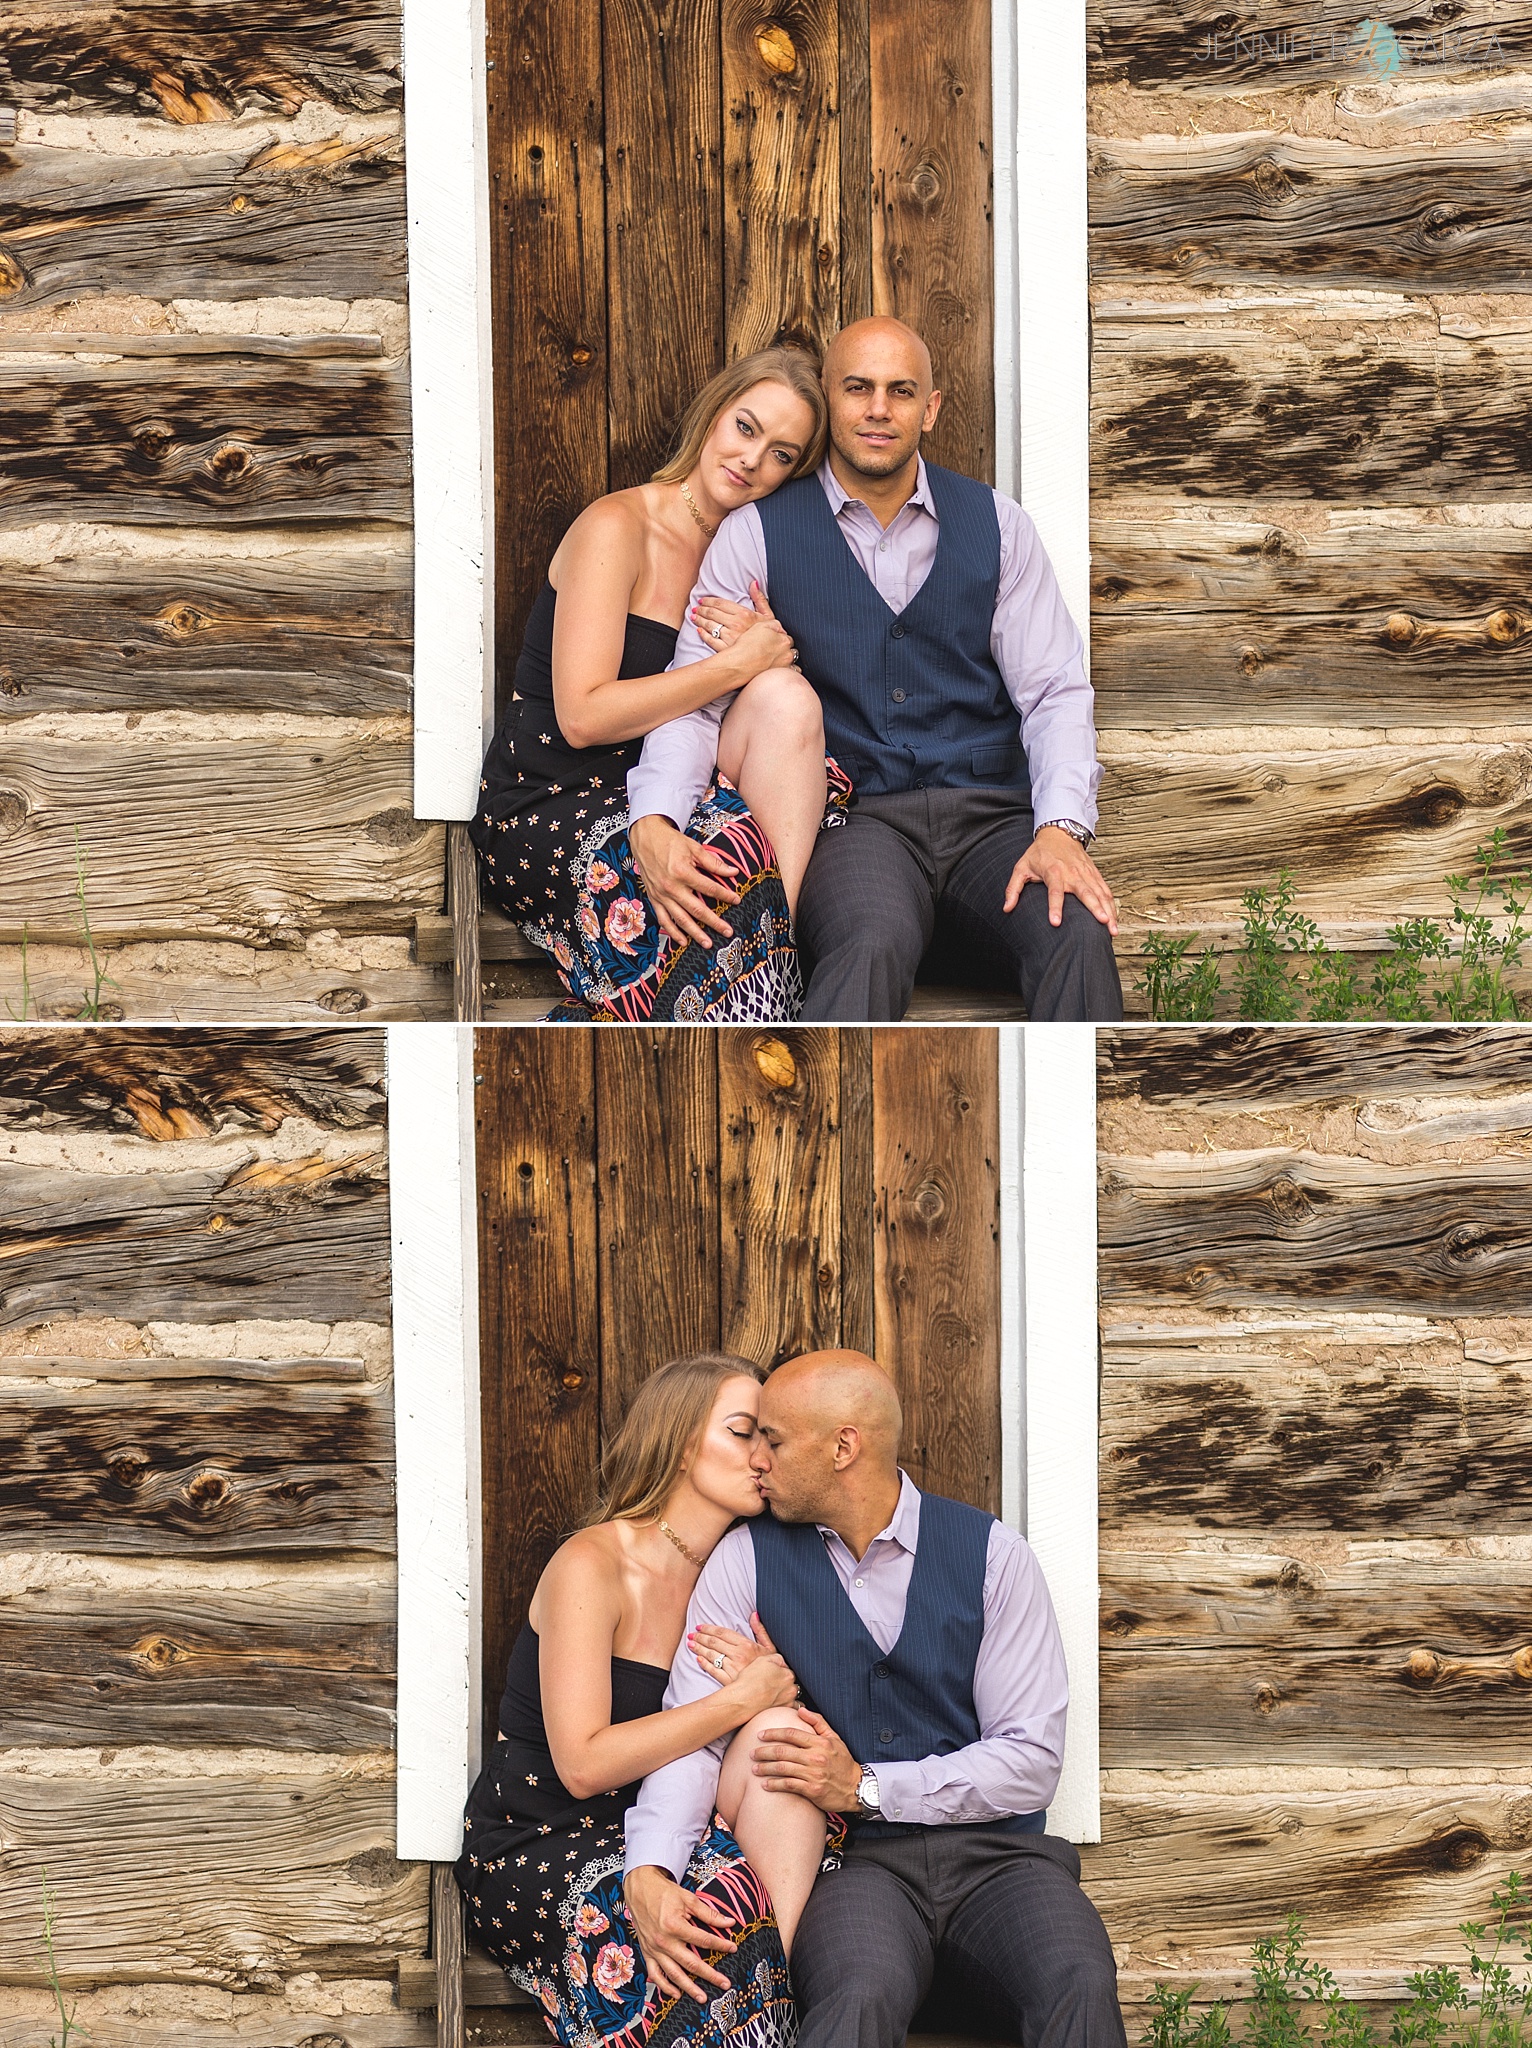 Kyley & Brian's Engagement Session at Clear Creek History Park in Golden, Colorado. Photographed by Jennifer Garza Photography.